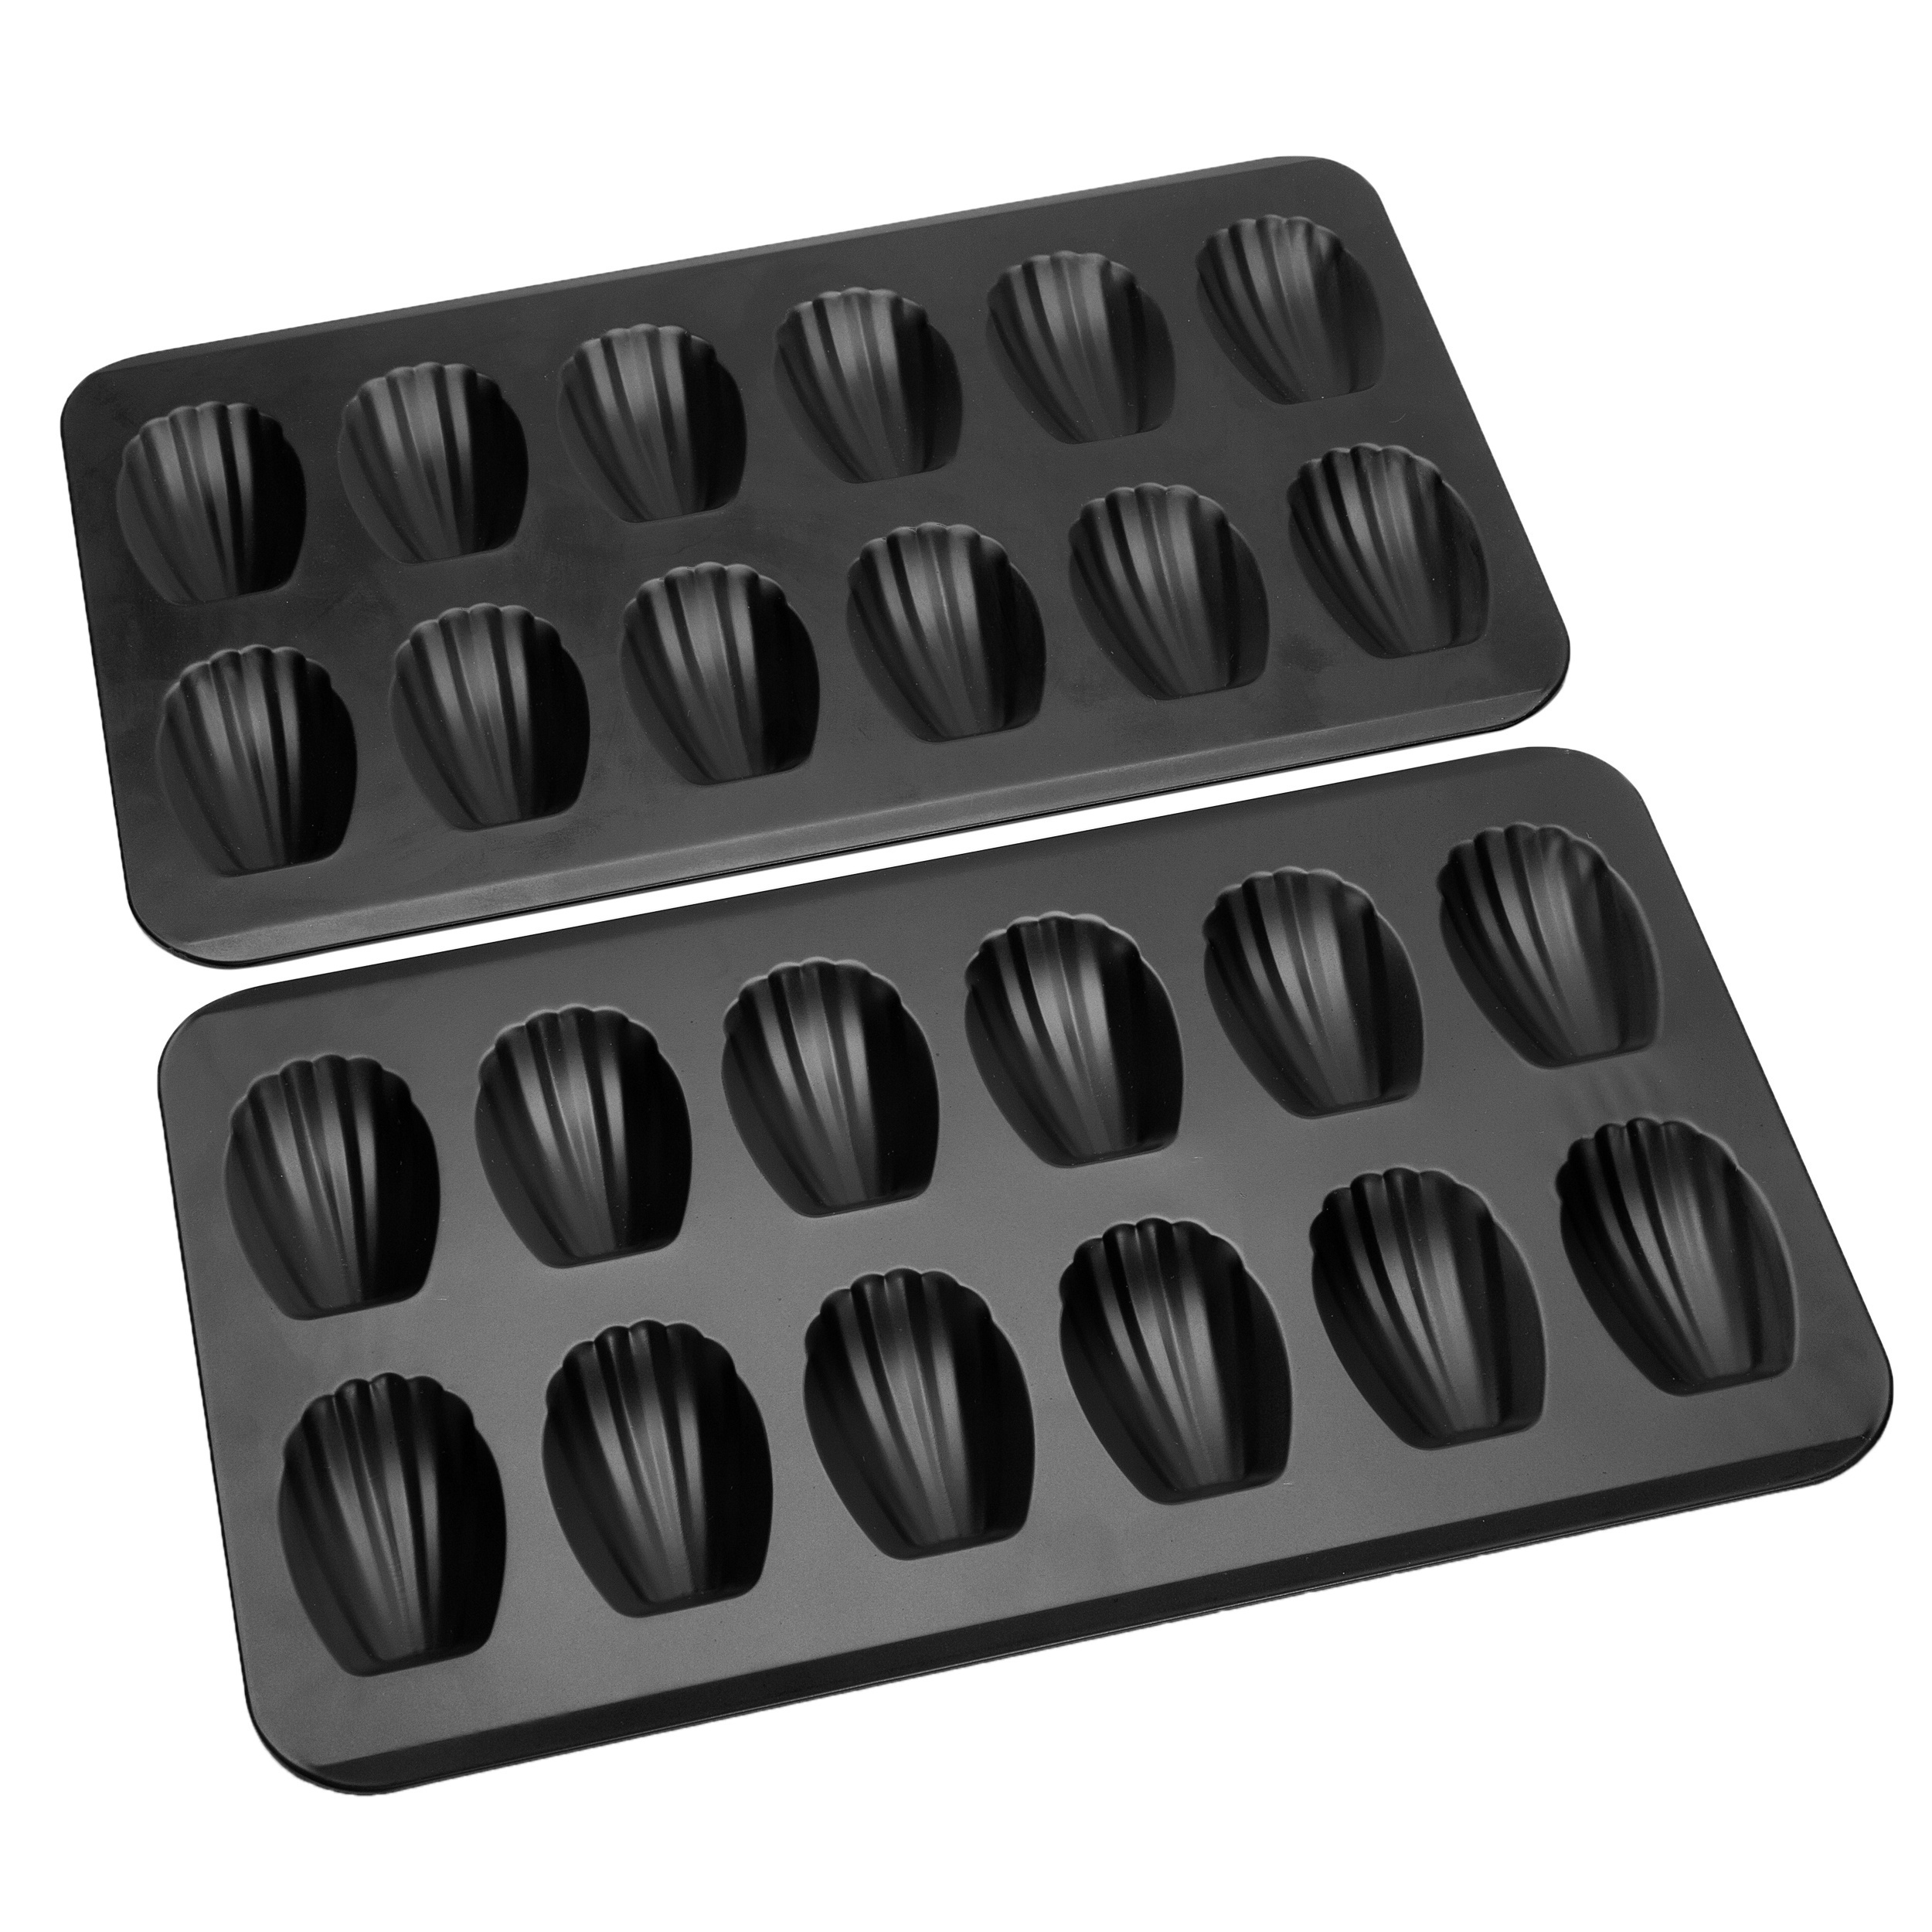 Chefmade 12 Cup Non-stick Shell Madeleine Cake Pan, Chestnut Cake Mold,  Black Non Stick Carbon Steel Baking Tray, Easy To Clean, Baking Tools,  Kitchen Gadgets, Kitchen Accessories, Home Kitchen Items - Temu